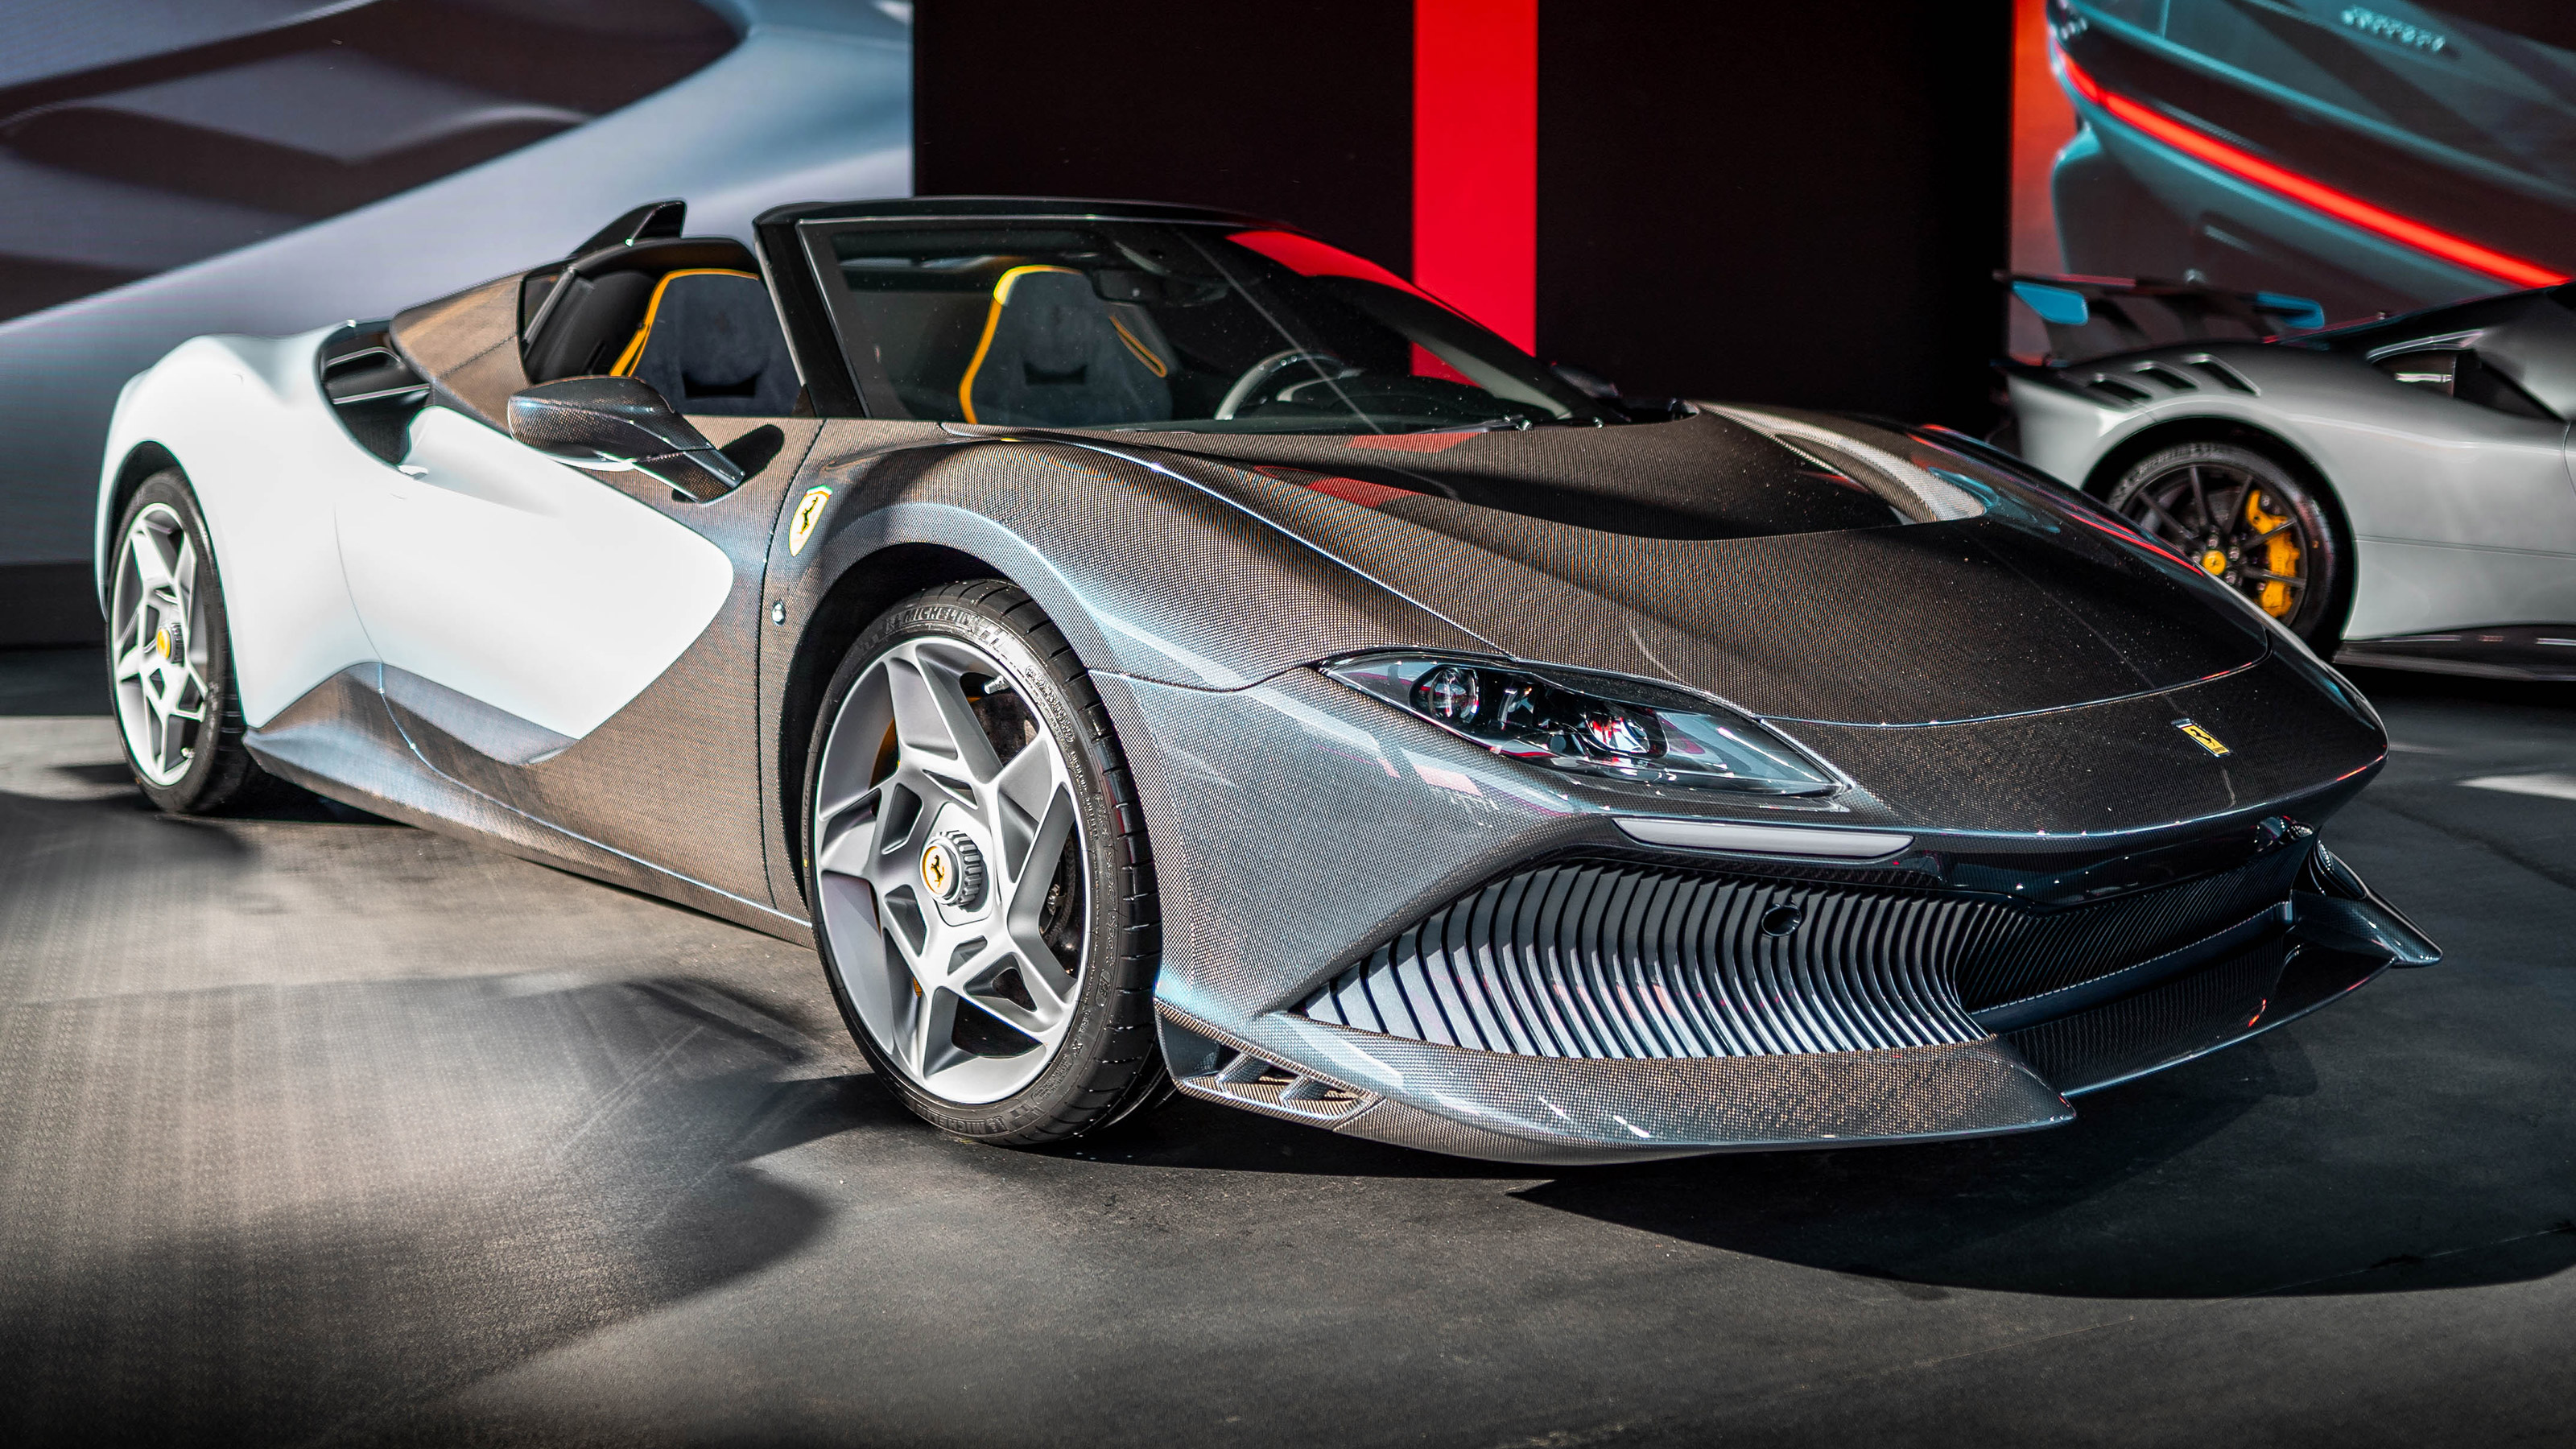 Ferrari's next hypercar could downsize to a V6